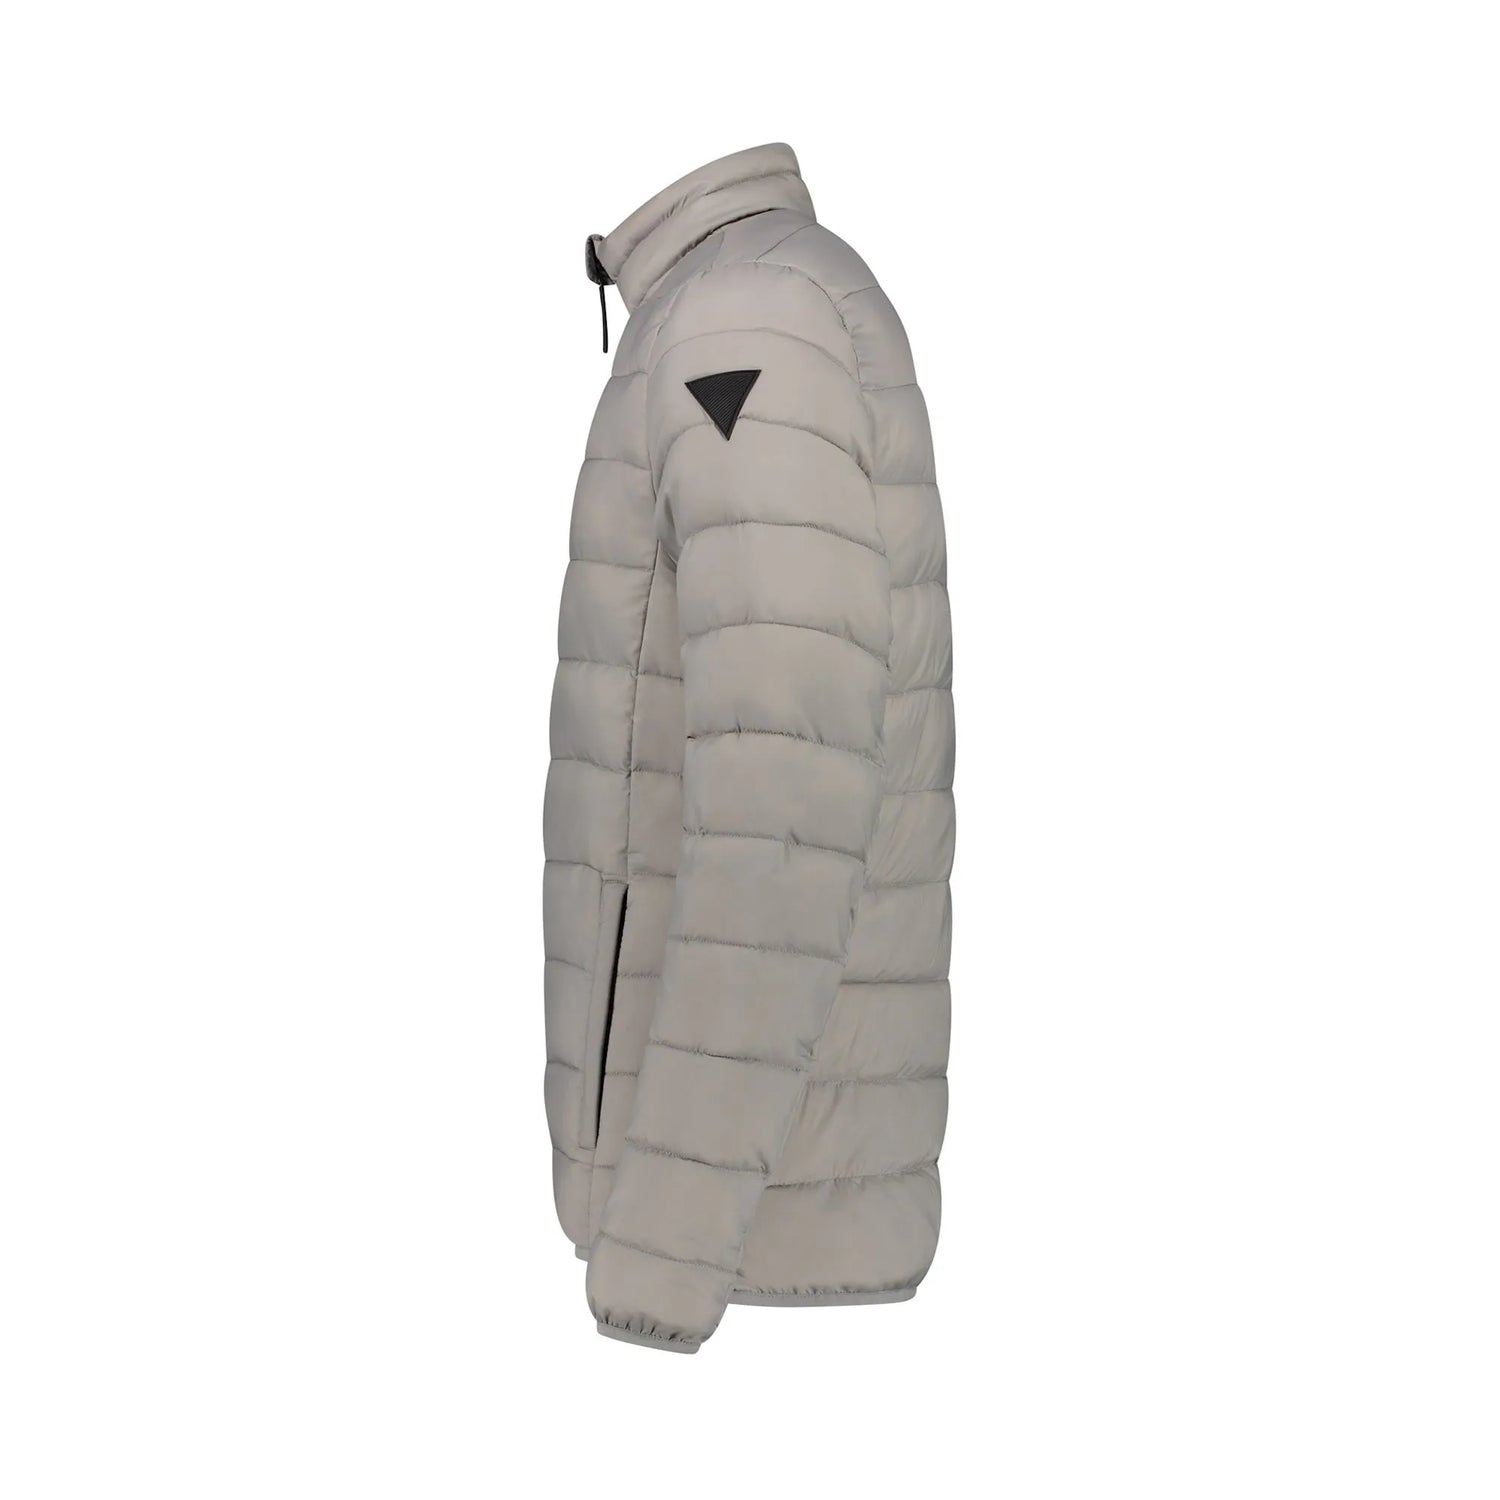 Light weight padded jacket with straight stitching